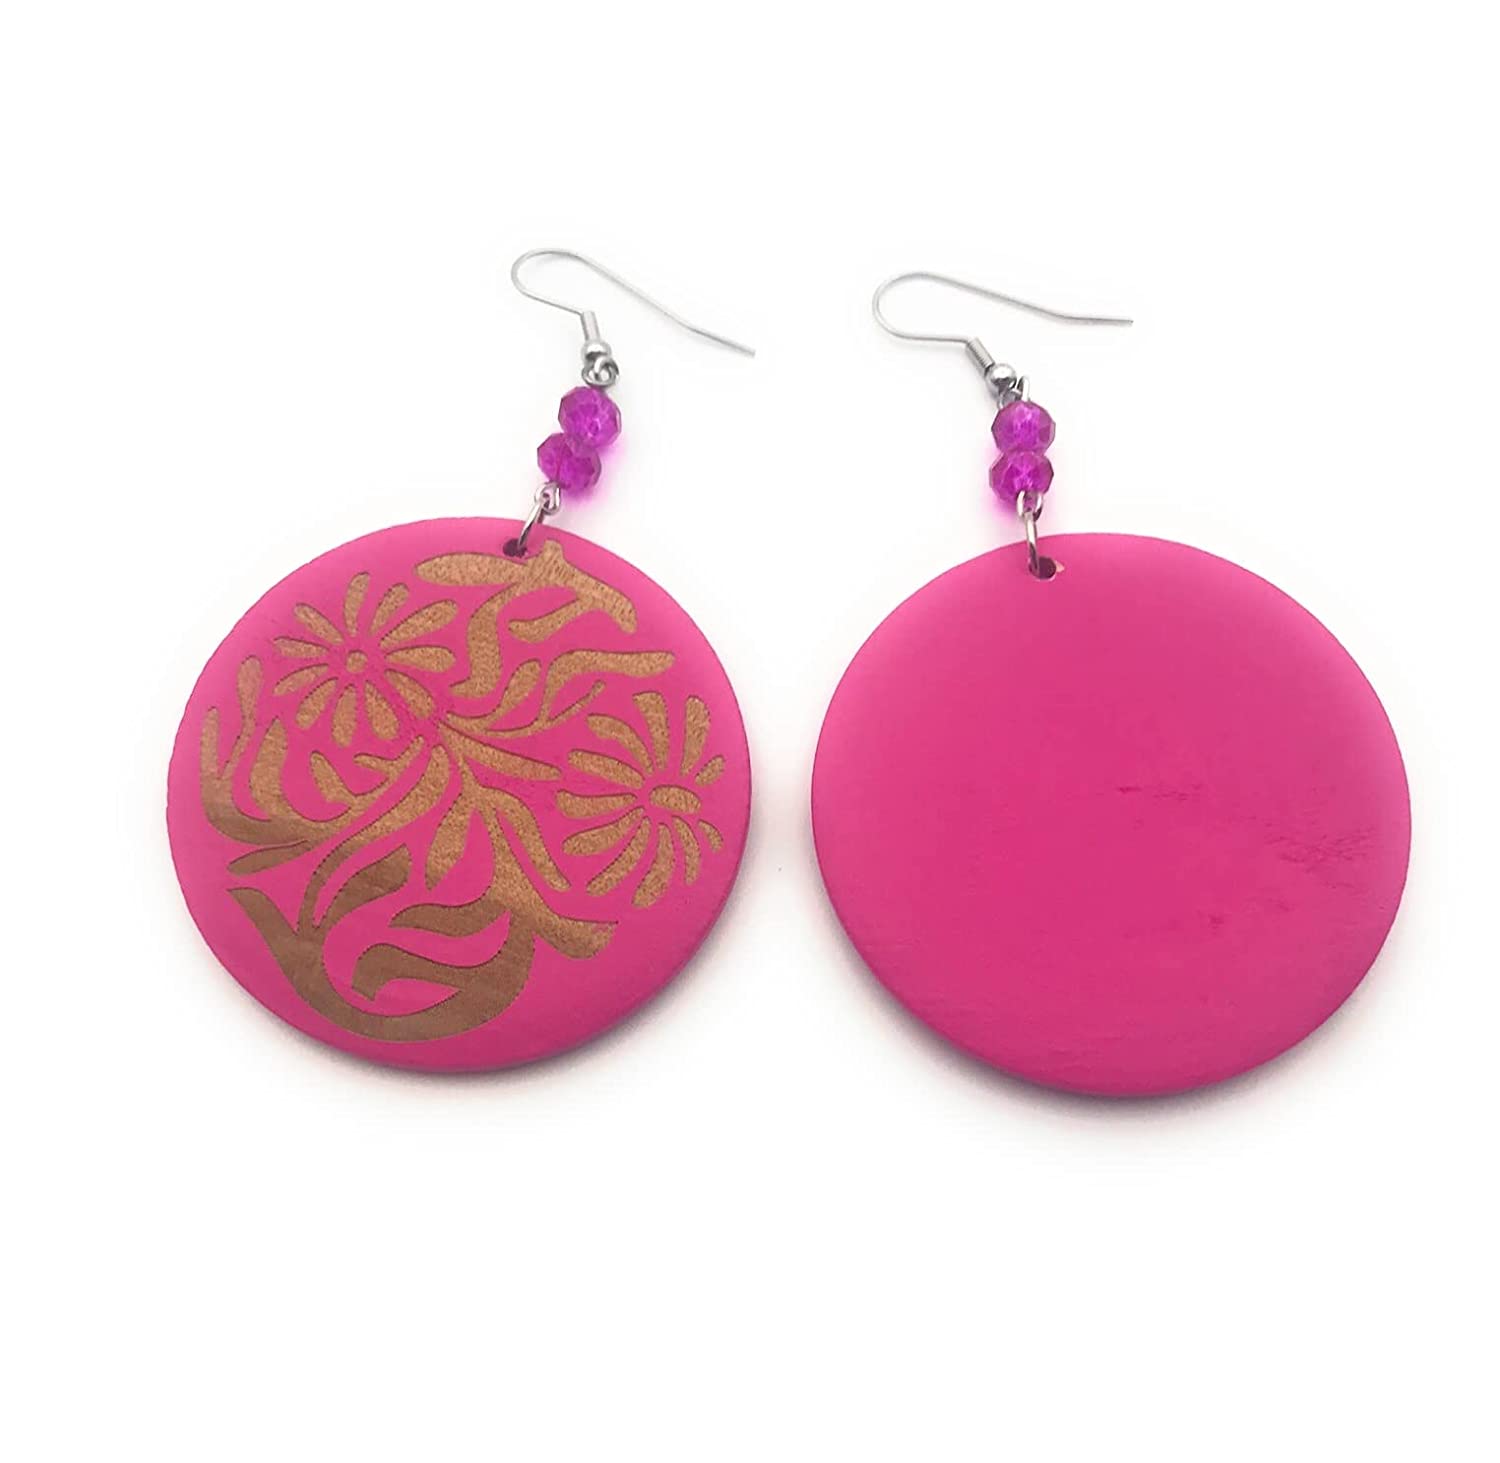 Hot Pink Wooden Dangle Earrings with Beaded Accents Front and Back from Scott D Jewelry Designs